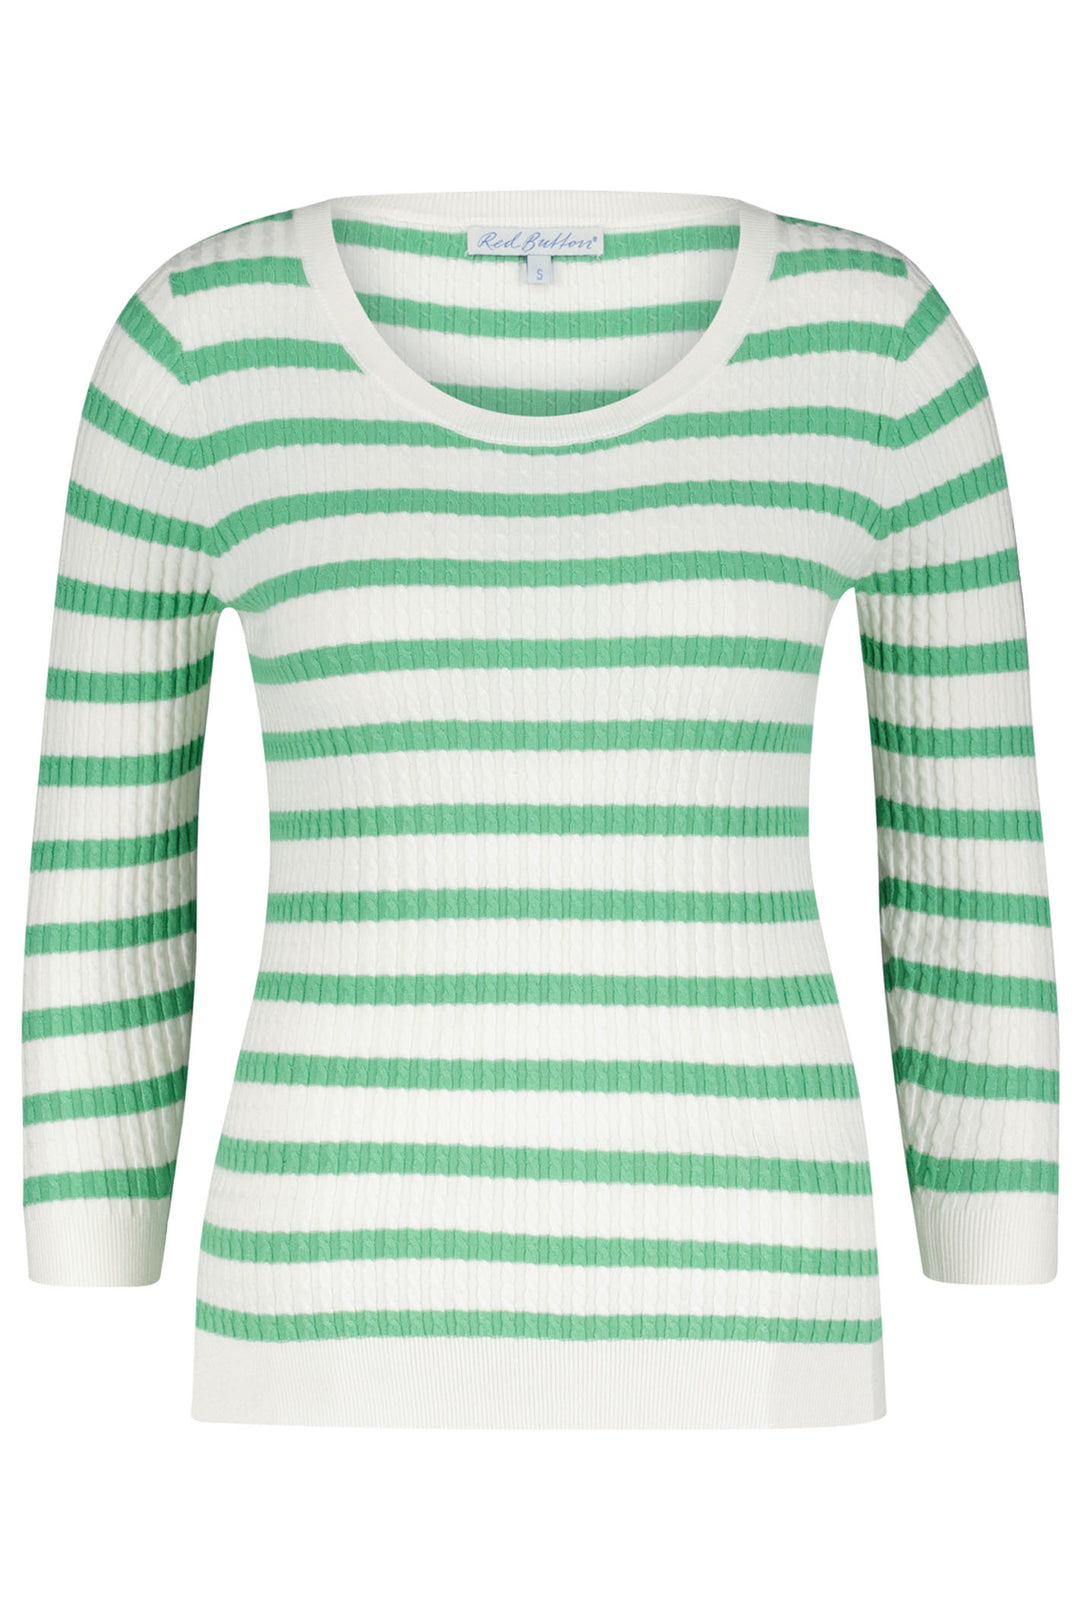 Red Button SRB4195 Summer Green Stripe Long Sleeve Cable Knit Top - Dotique